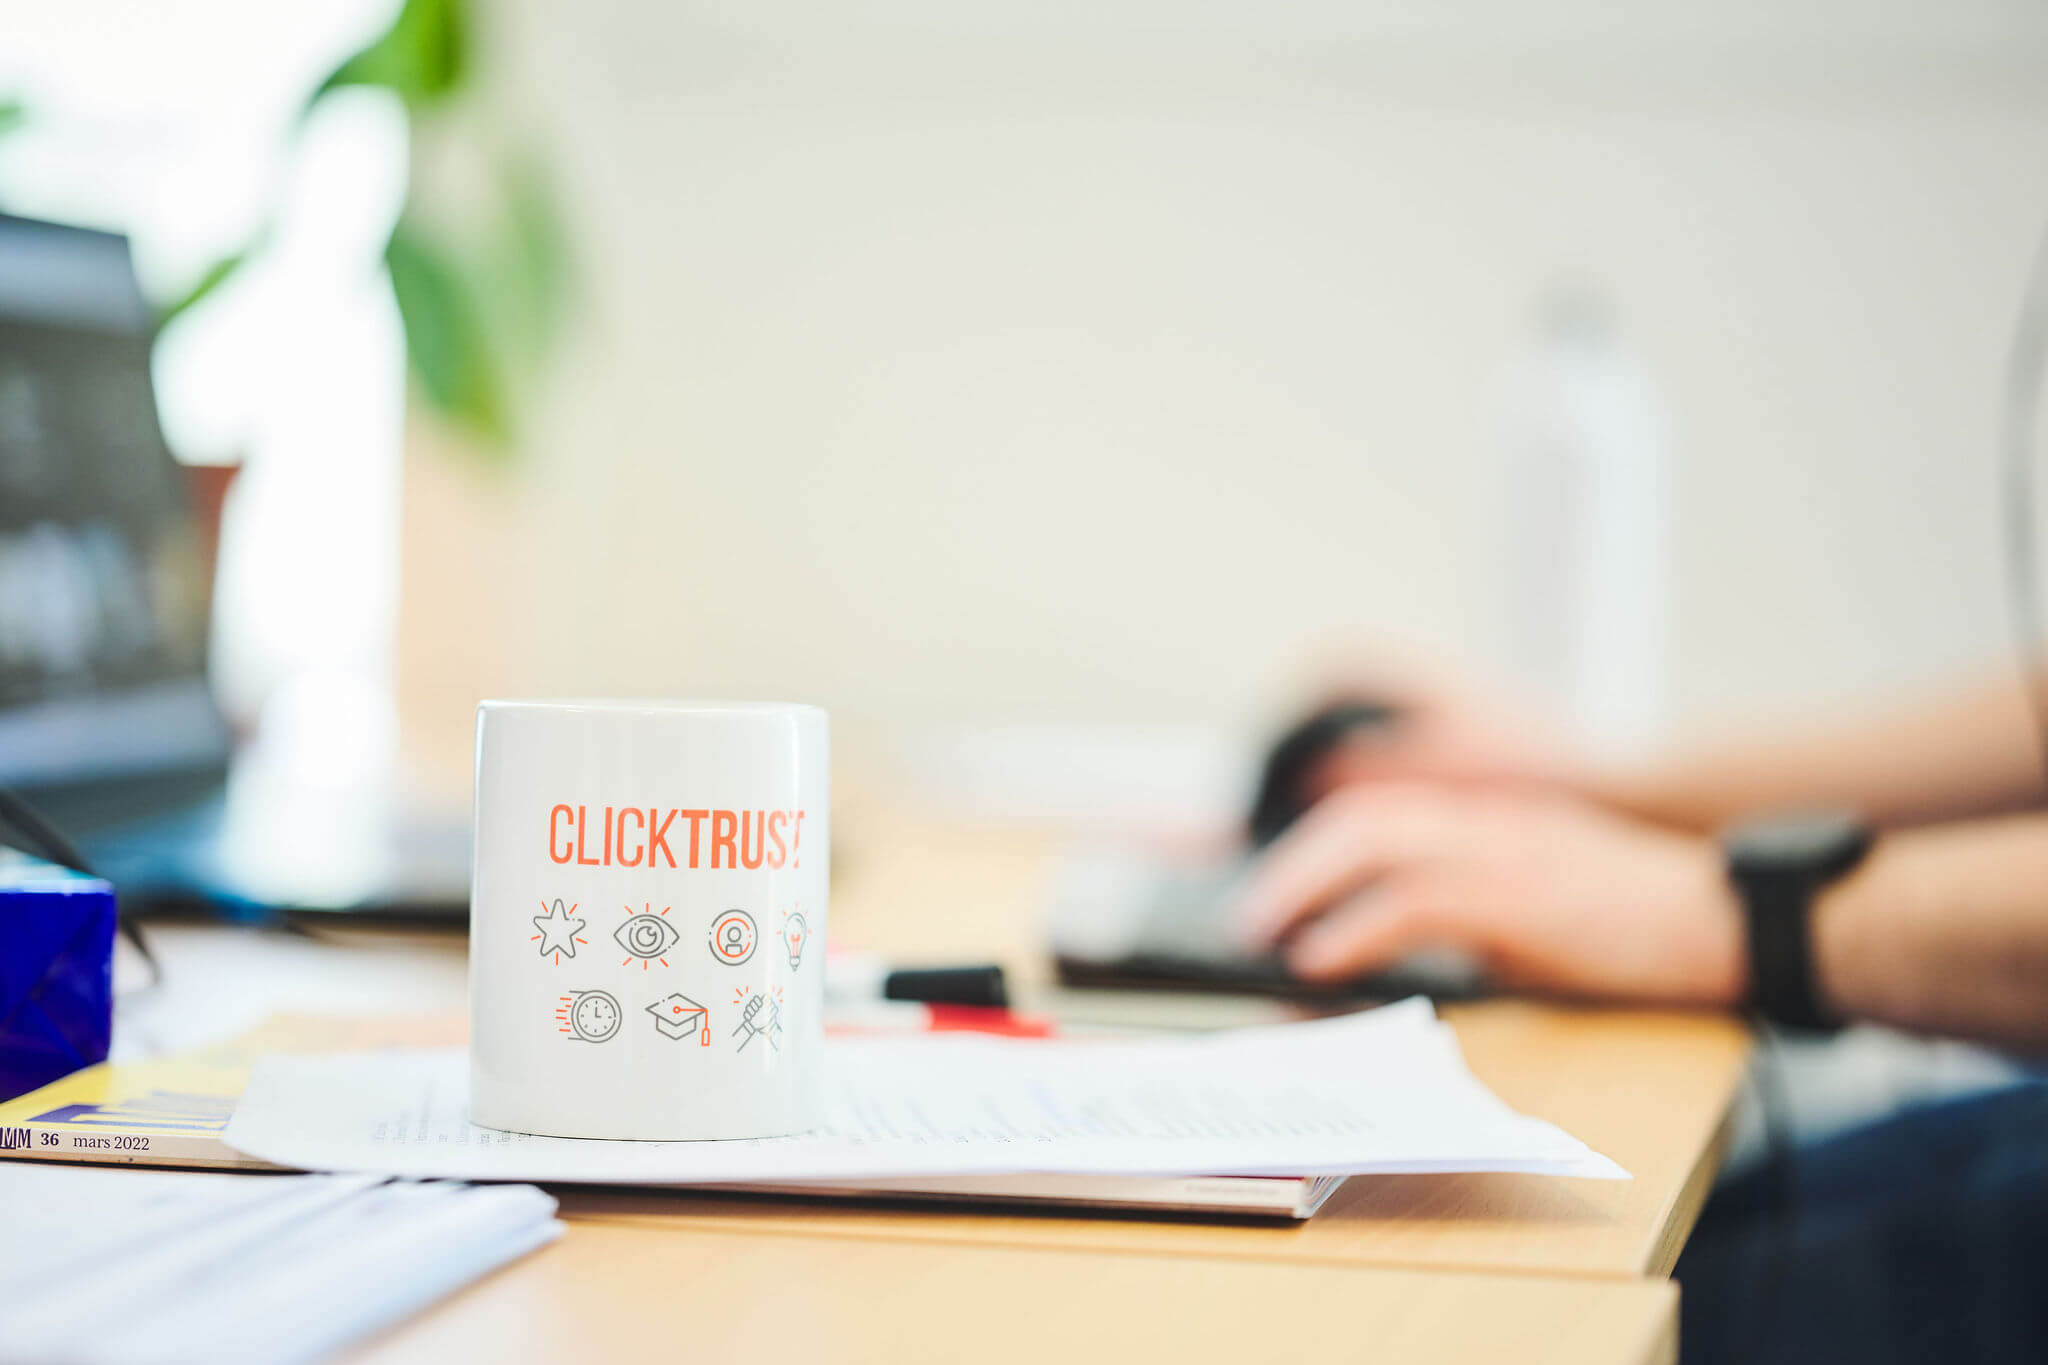 The CLICKTRUST monthly pick – September 2019